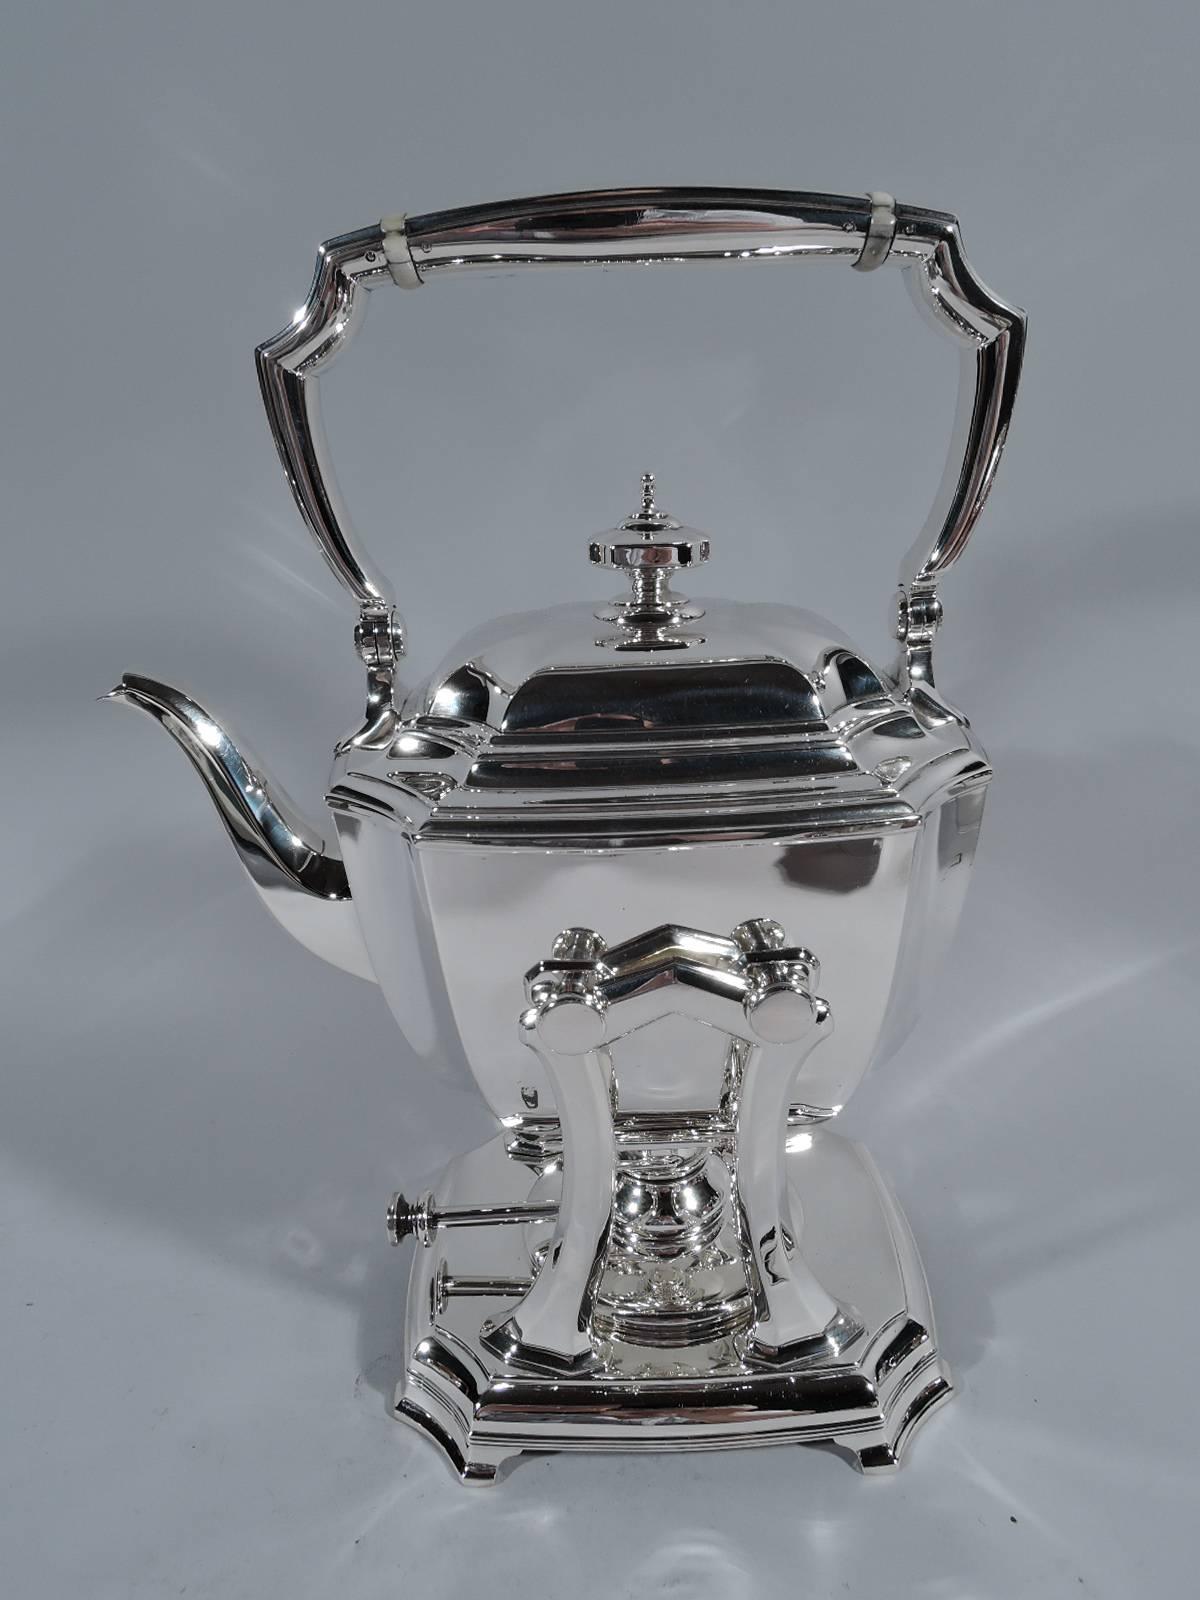 Sterling silver coffee and tea set in desirable Hampton pattern. Made by Tiffany & Co. in New York, circa 1912. This set comprises kettle on stand, coffeepot, teapot, creamer, sugar, and waste bowl. Rectilinear with curved sides, concave